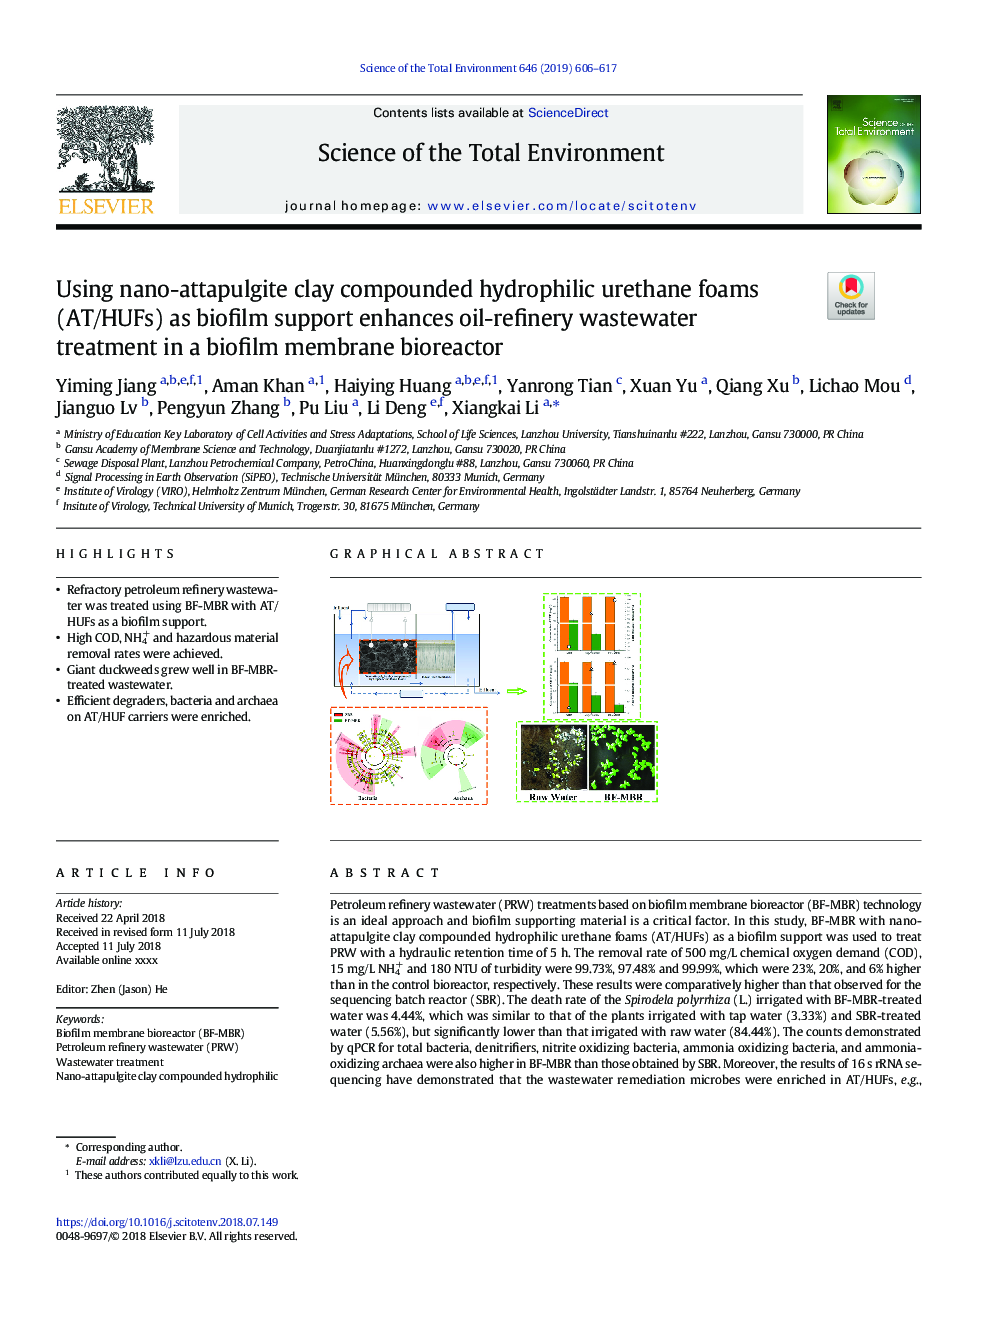 Using nano-attapulgite clay compounded hydrophilic urethane foams (AT/HUFs) as biofilm support enhances oil-refinery wastewater treatment in a biofilm membrane bioreactor